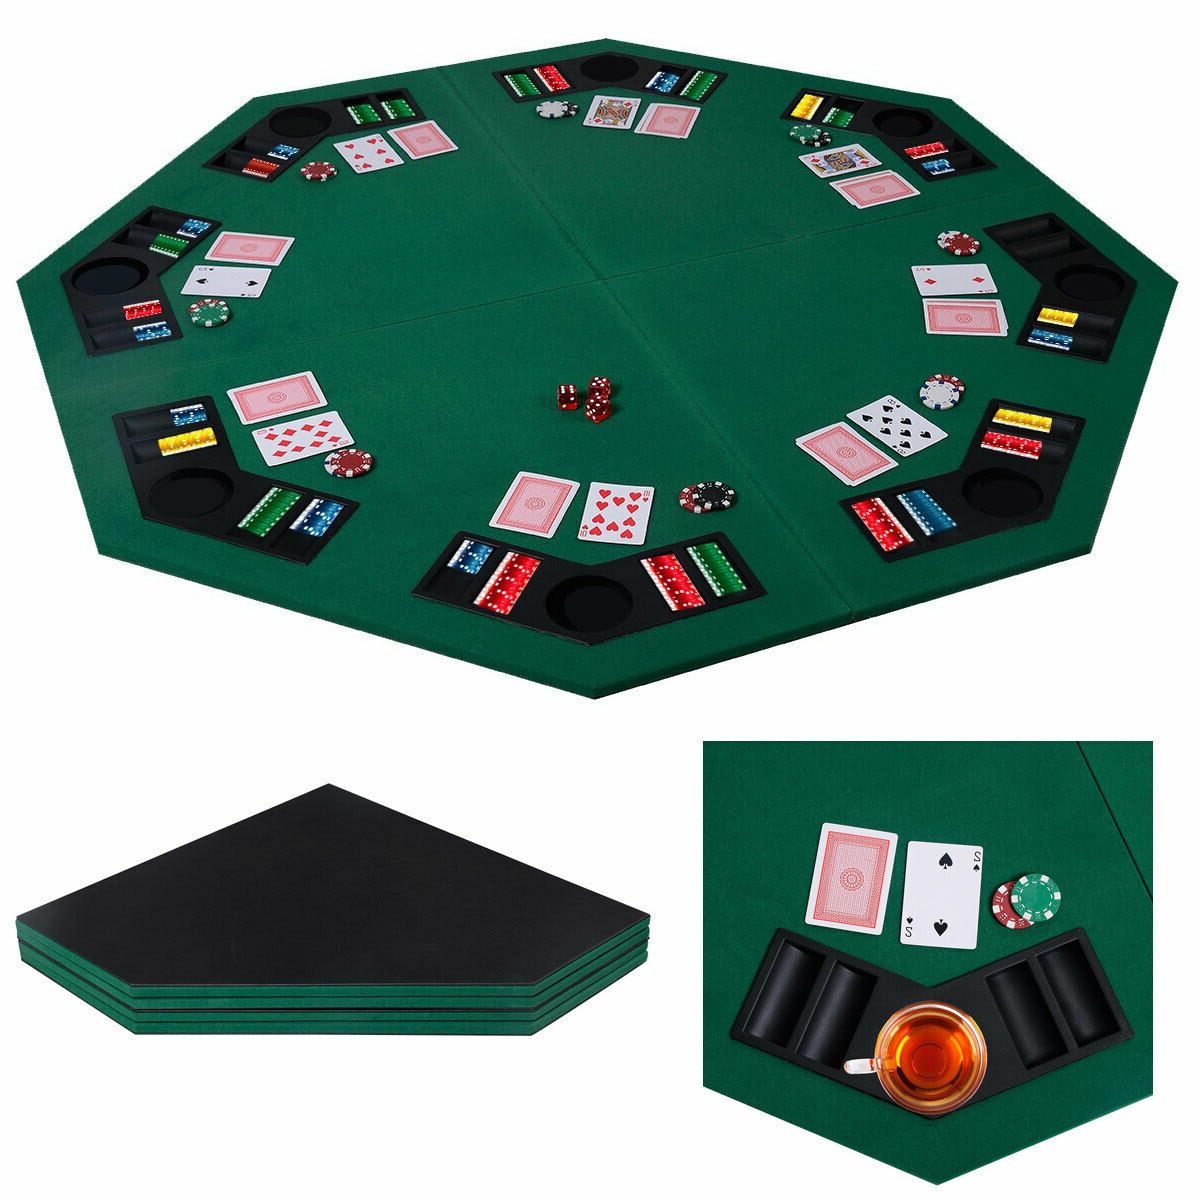 Newest Folding Poker Table Top 48" Octagon Seats 8 Players 4 Fold With Regard To Mcbride 48" 4 – Player Poker Tables (Gallery 20 of 20)